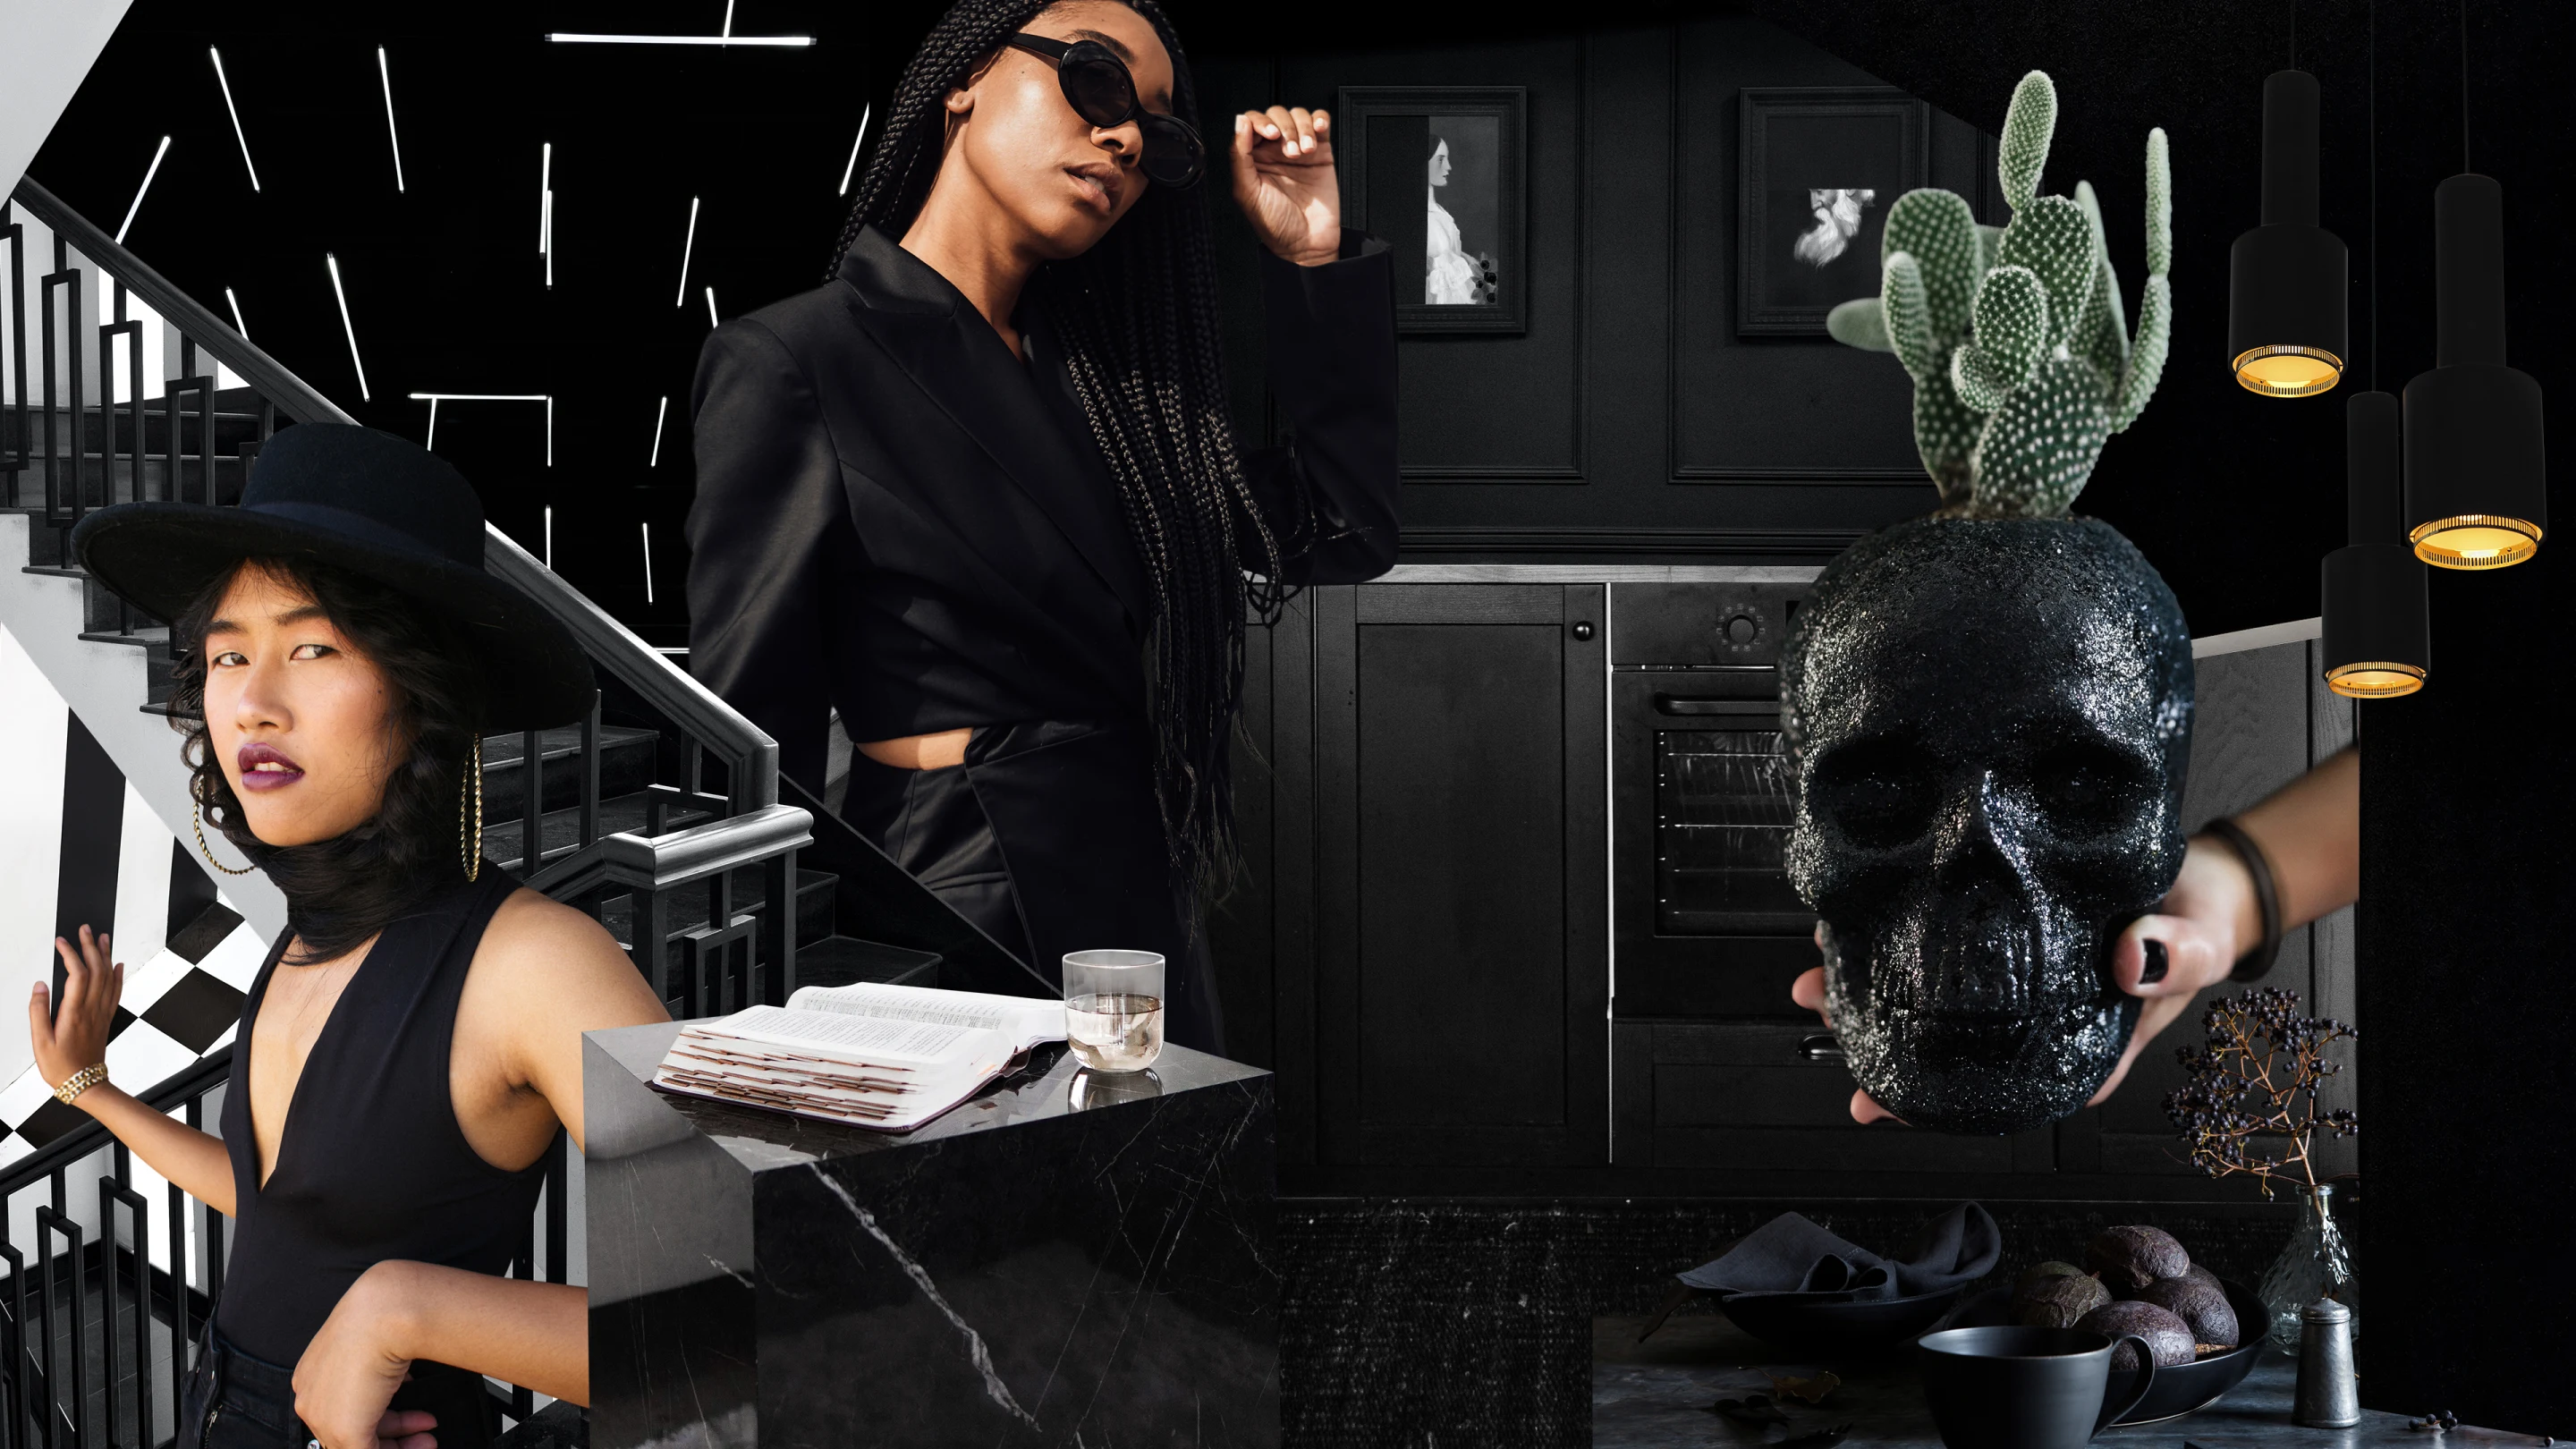 Collage with black objects.  Black and white stairs on the left.  Black marble with a book and a glass of water on it.  Black woman wearing black clothes and glasses.  A hand with black nail polish holding a black bowl.  East Asian woman in black hat, dress and scarf.  Black pendant lights.